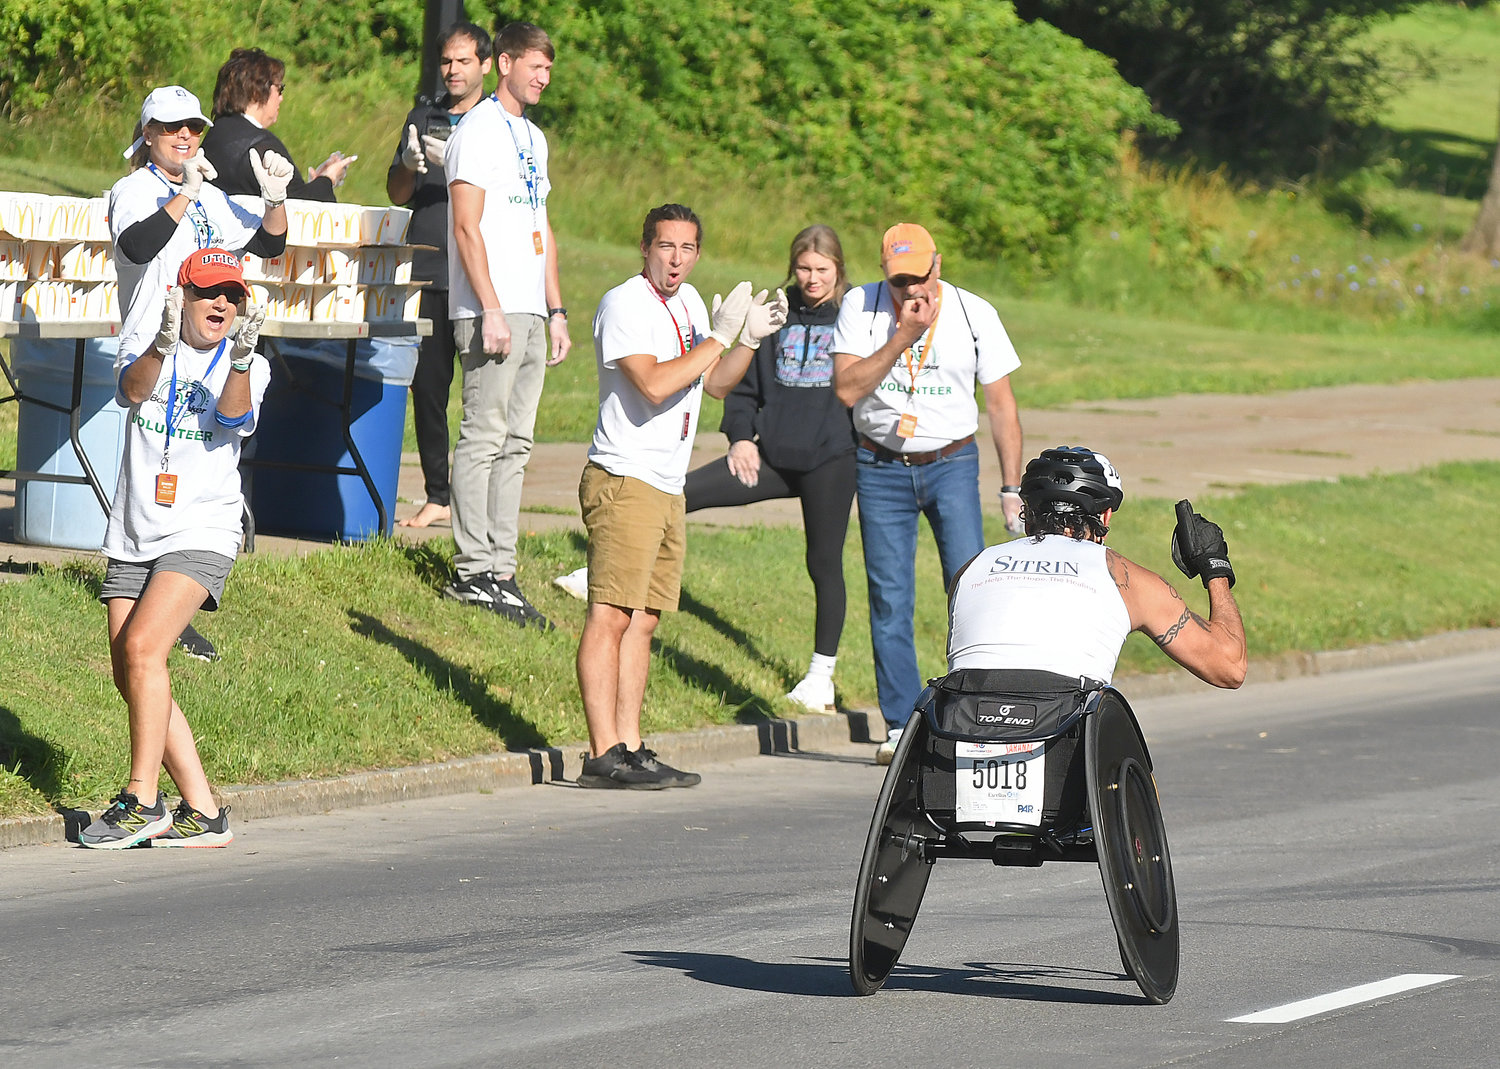 Wheelchair racer James Joseph of New Hartford gives a thumbs up to spectators cheering him on as he rockets down Memorial Parkway after coming down Master Garden Road in the 45th Boilermaker Road Race Sunday. Joseph was 25th in the race.